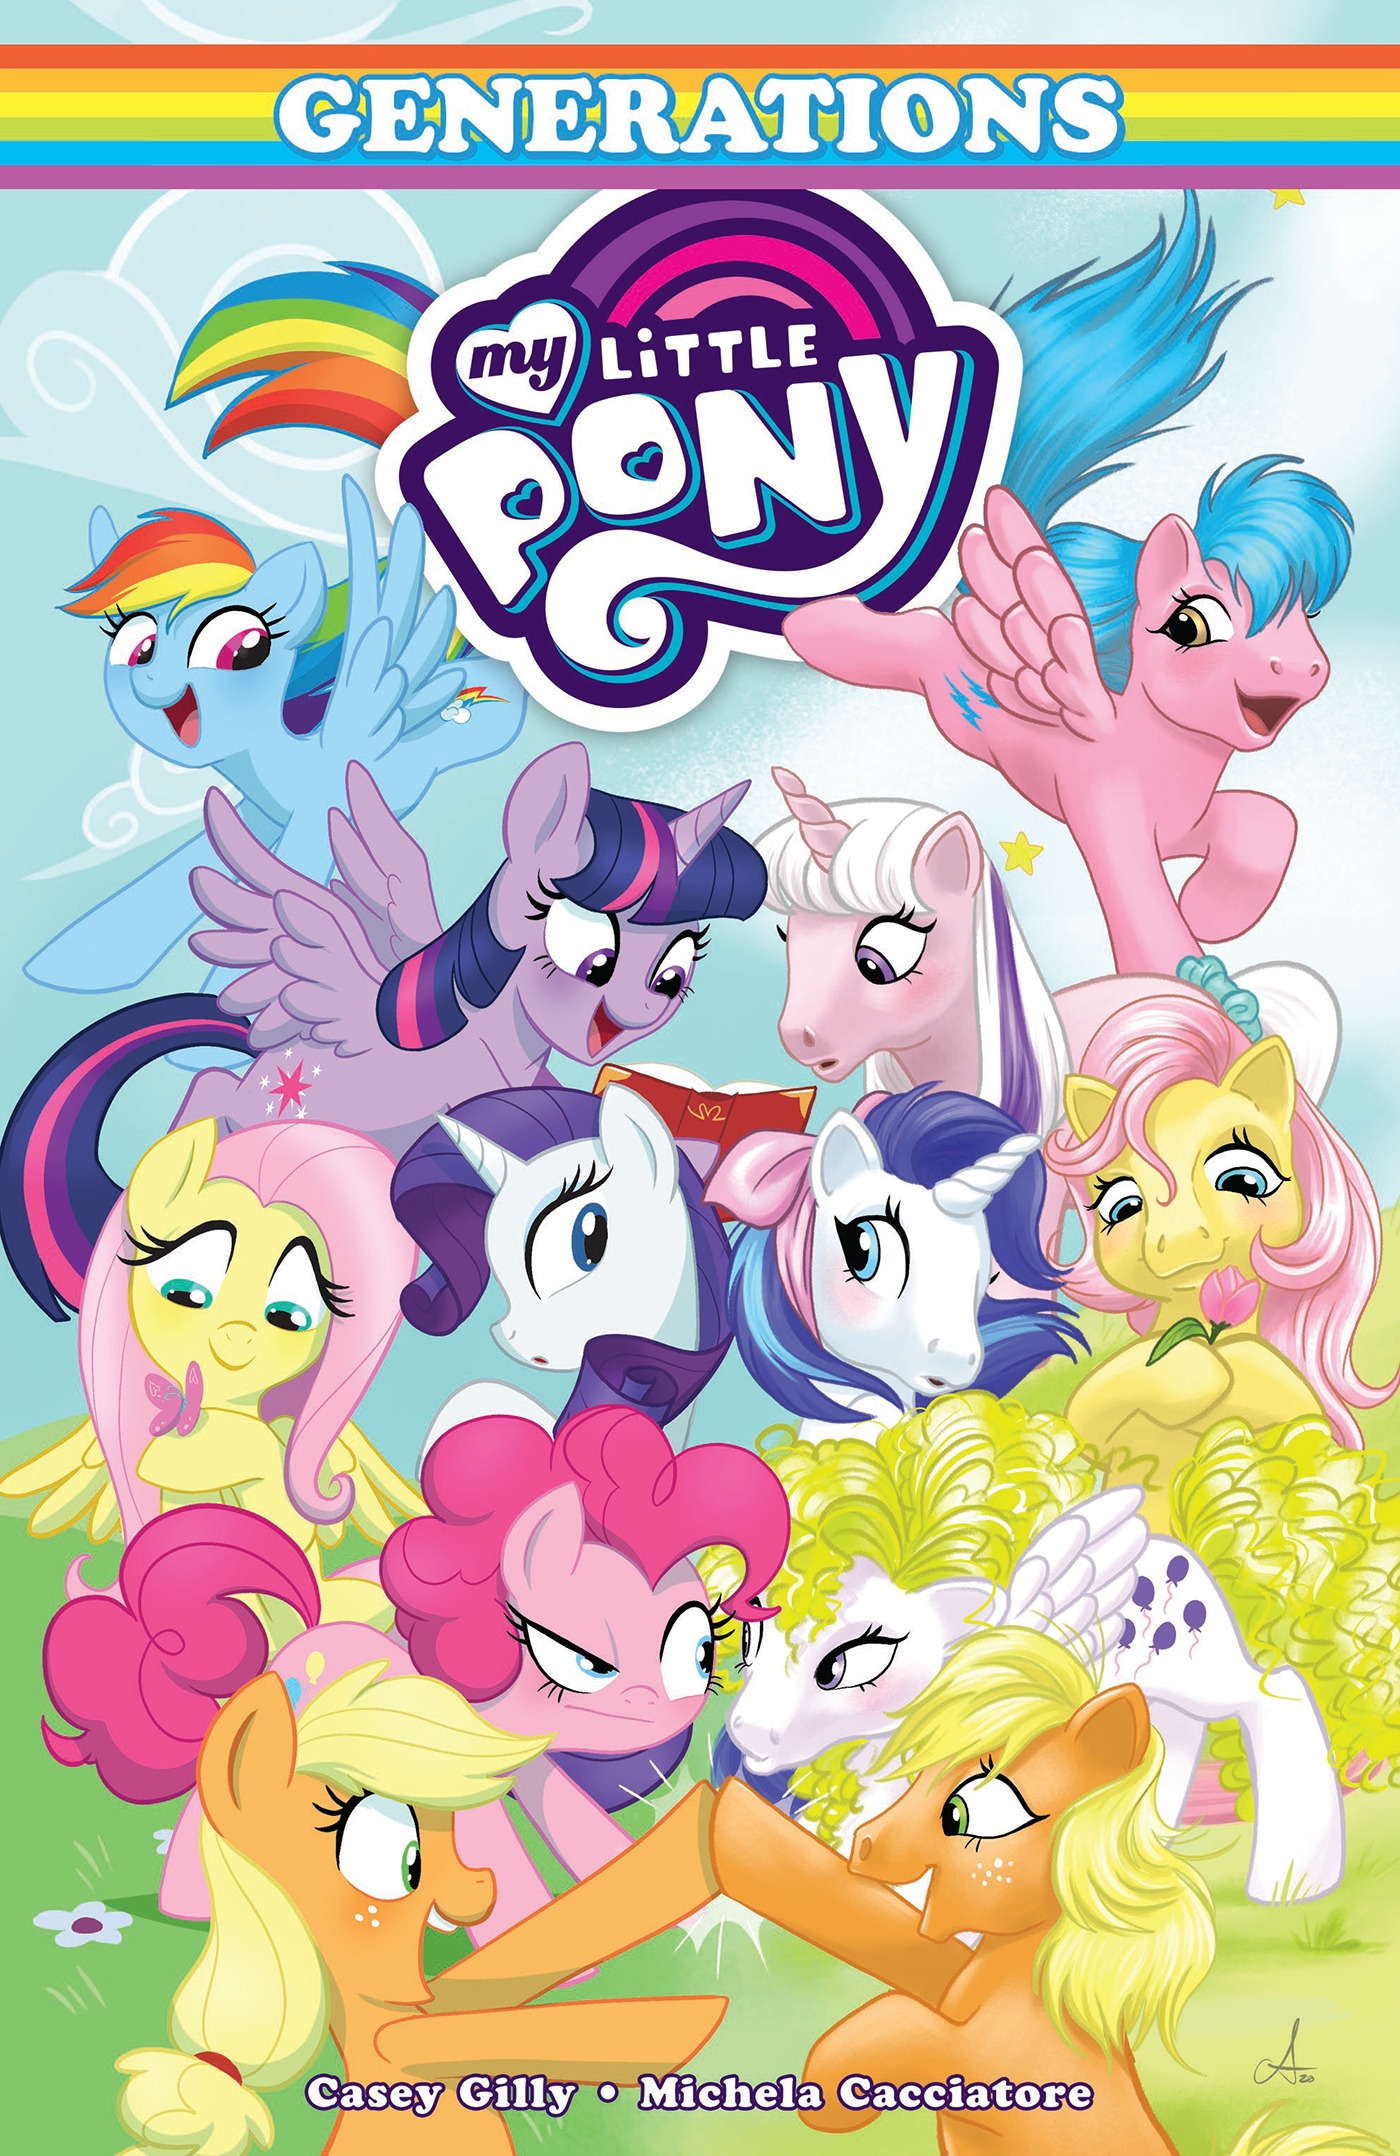 My Little Pony: Generations by Casey Gilly - Penguin Books New Zealand